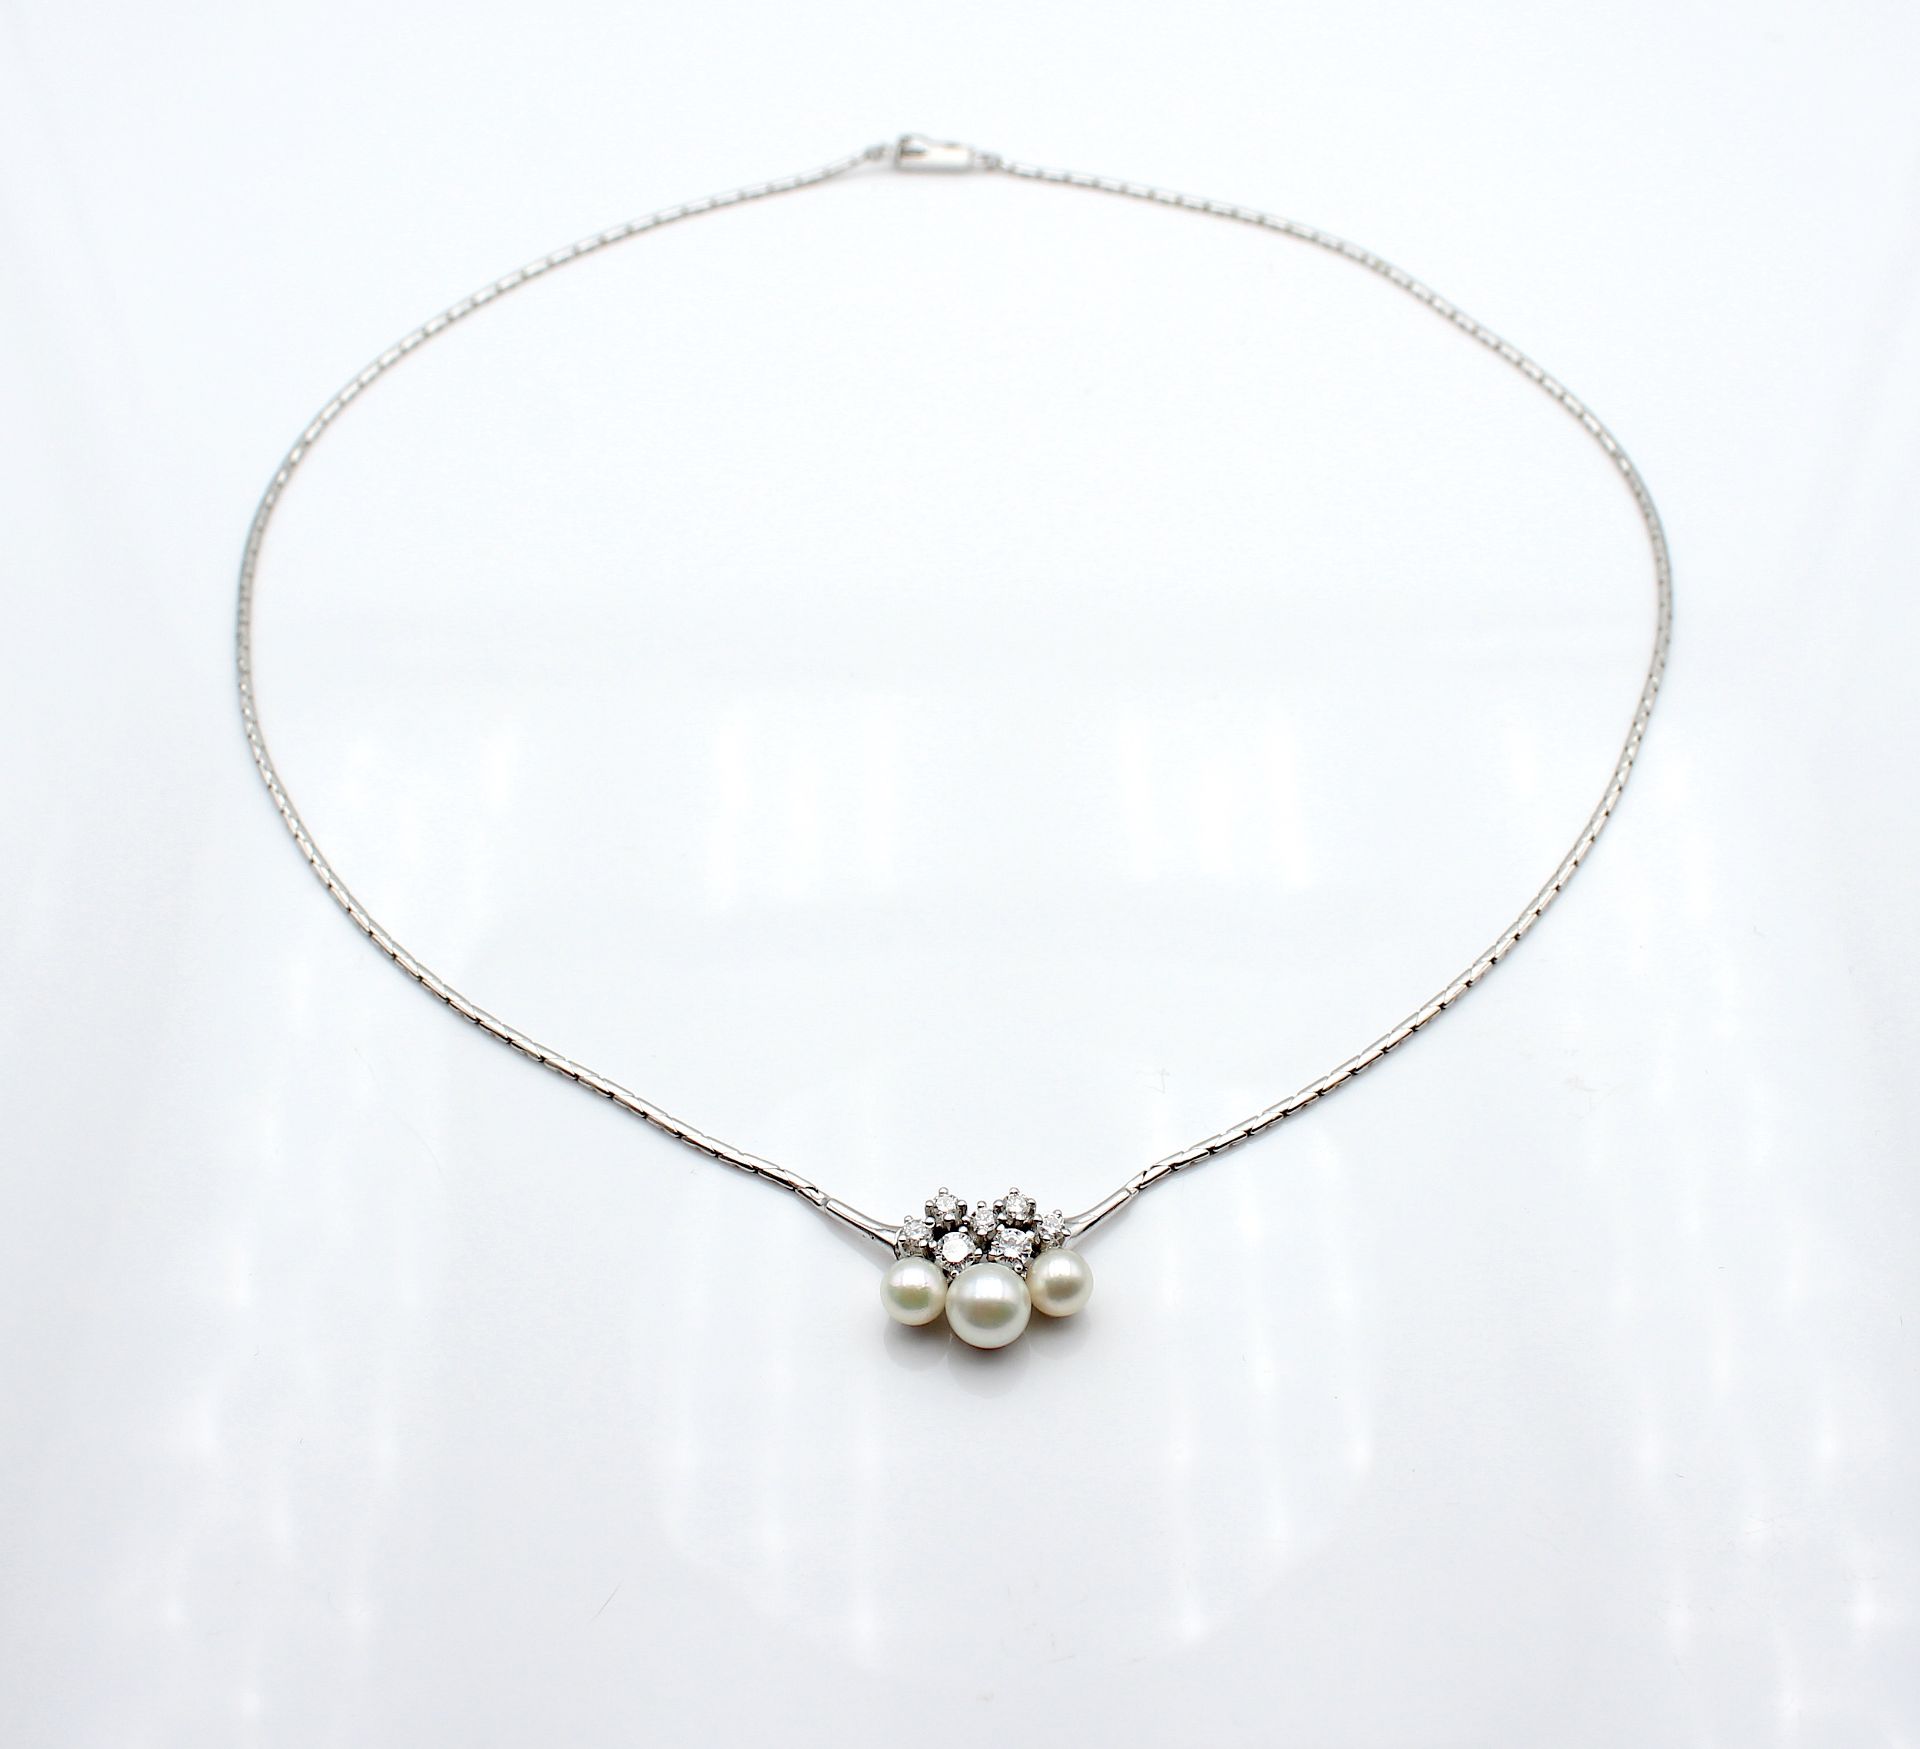 Necklace with cultured pearls and brilliants  - Image 2 of 2